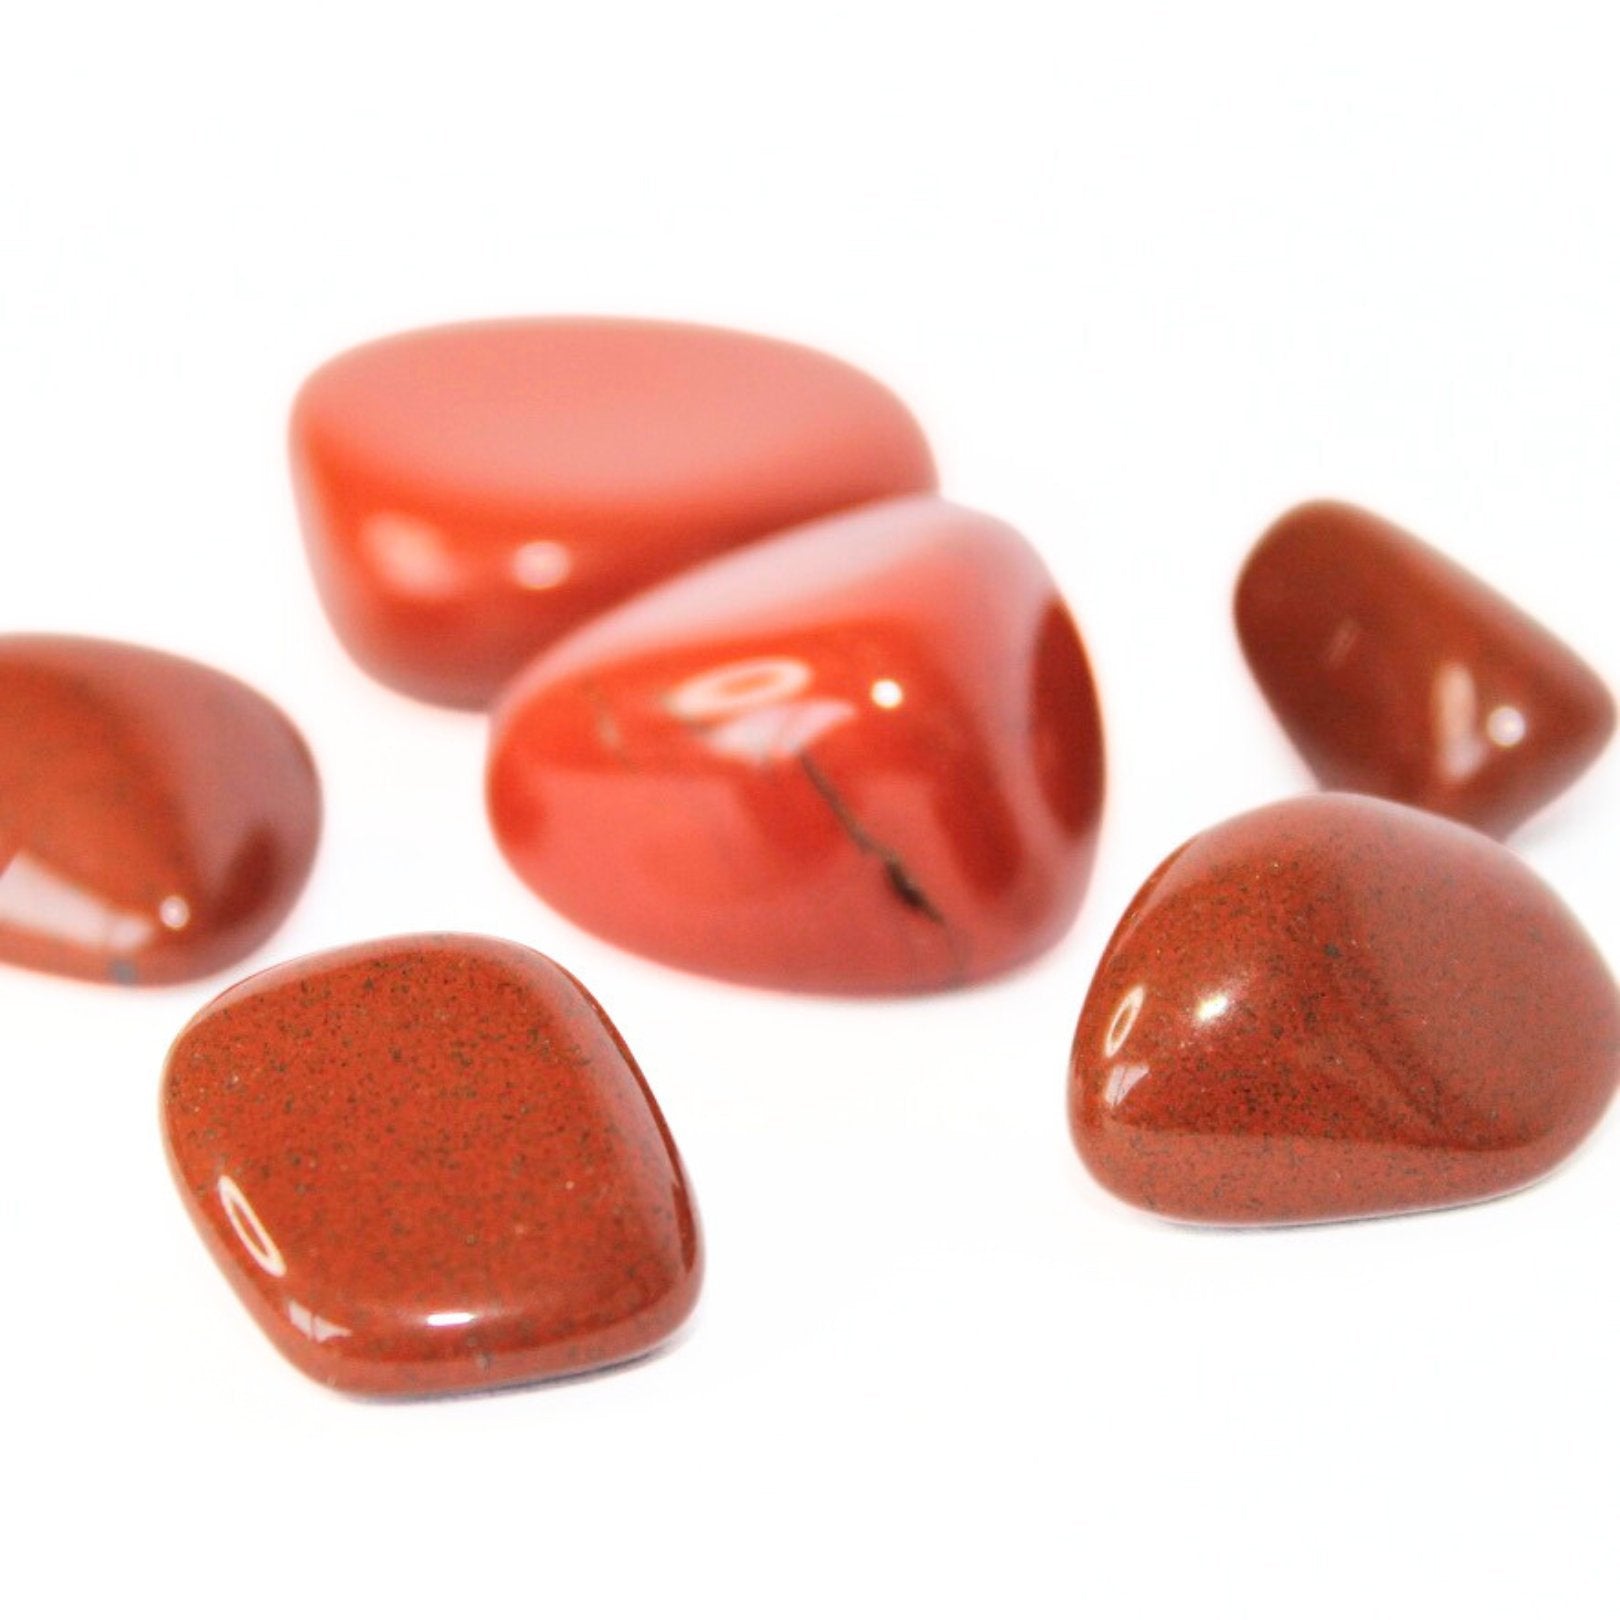 Red Jasper Tumble - Conscious Crystals New Zealand Crystal and Spiritual Shop